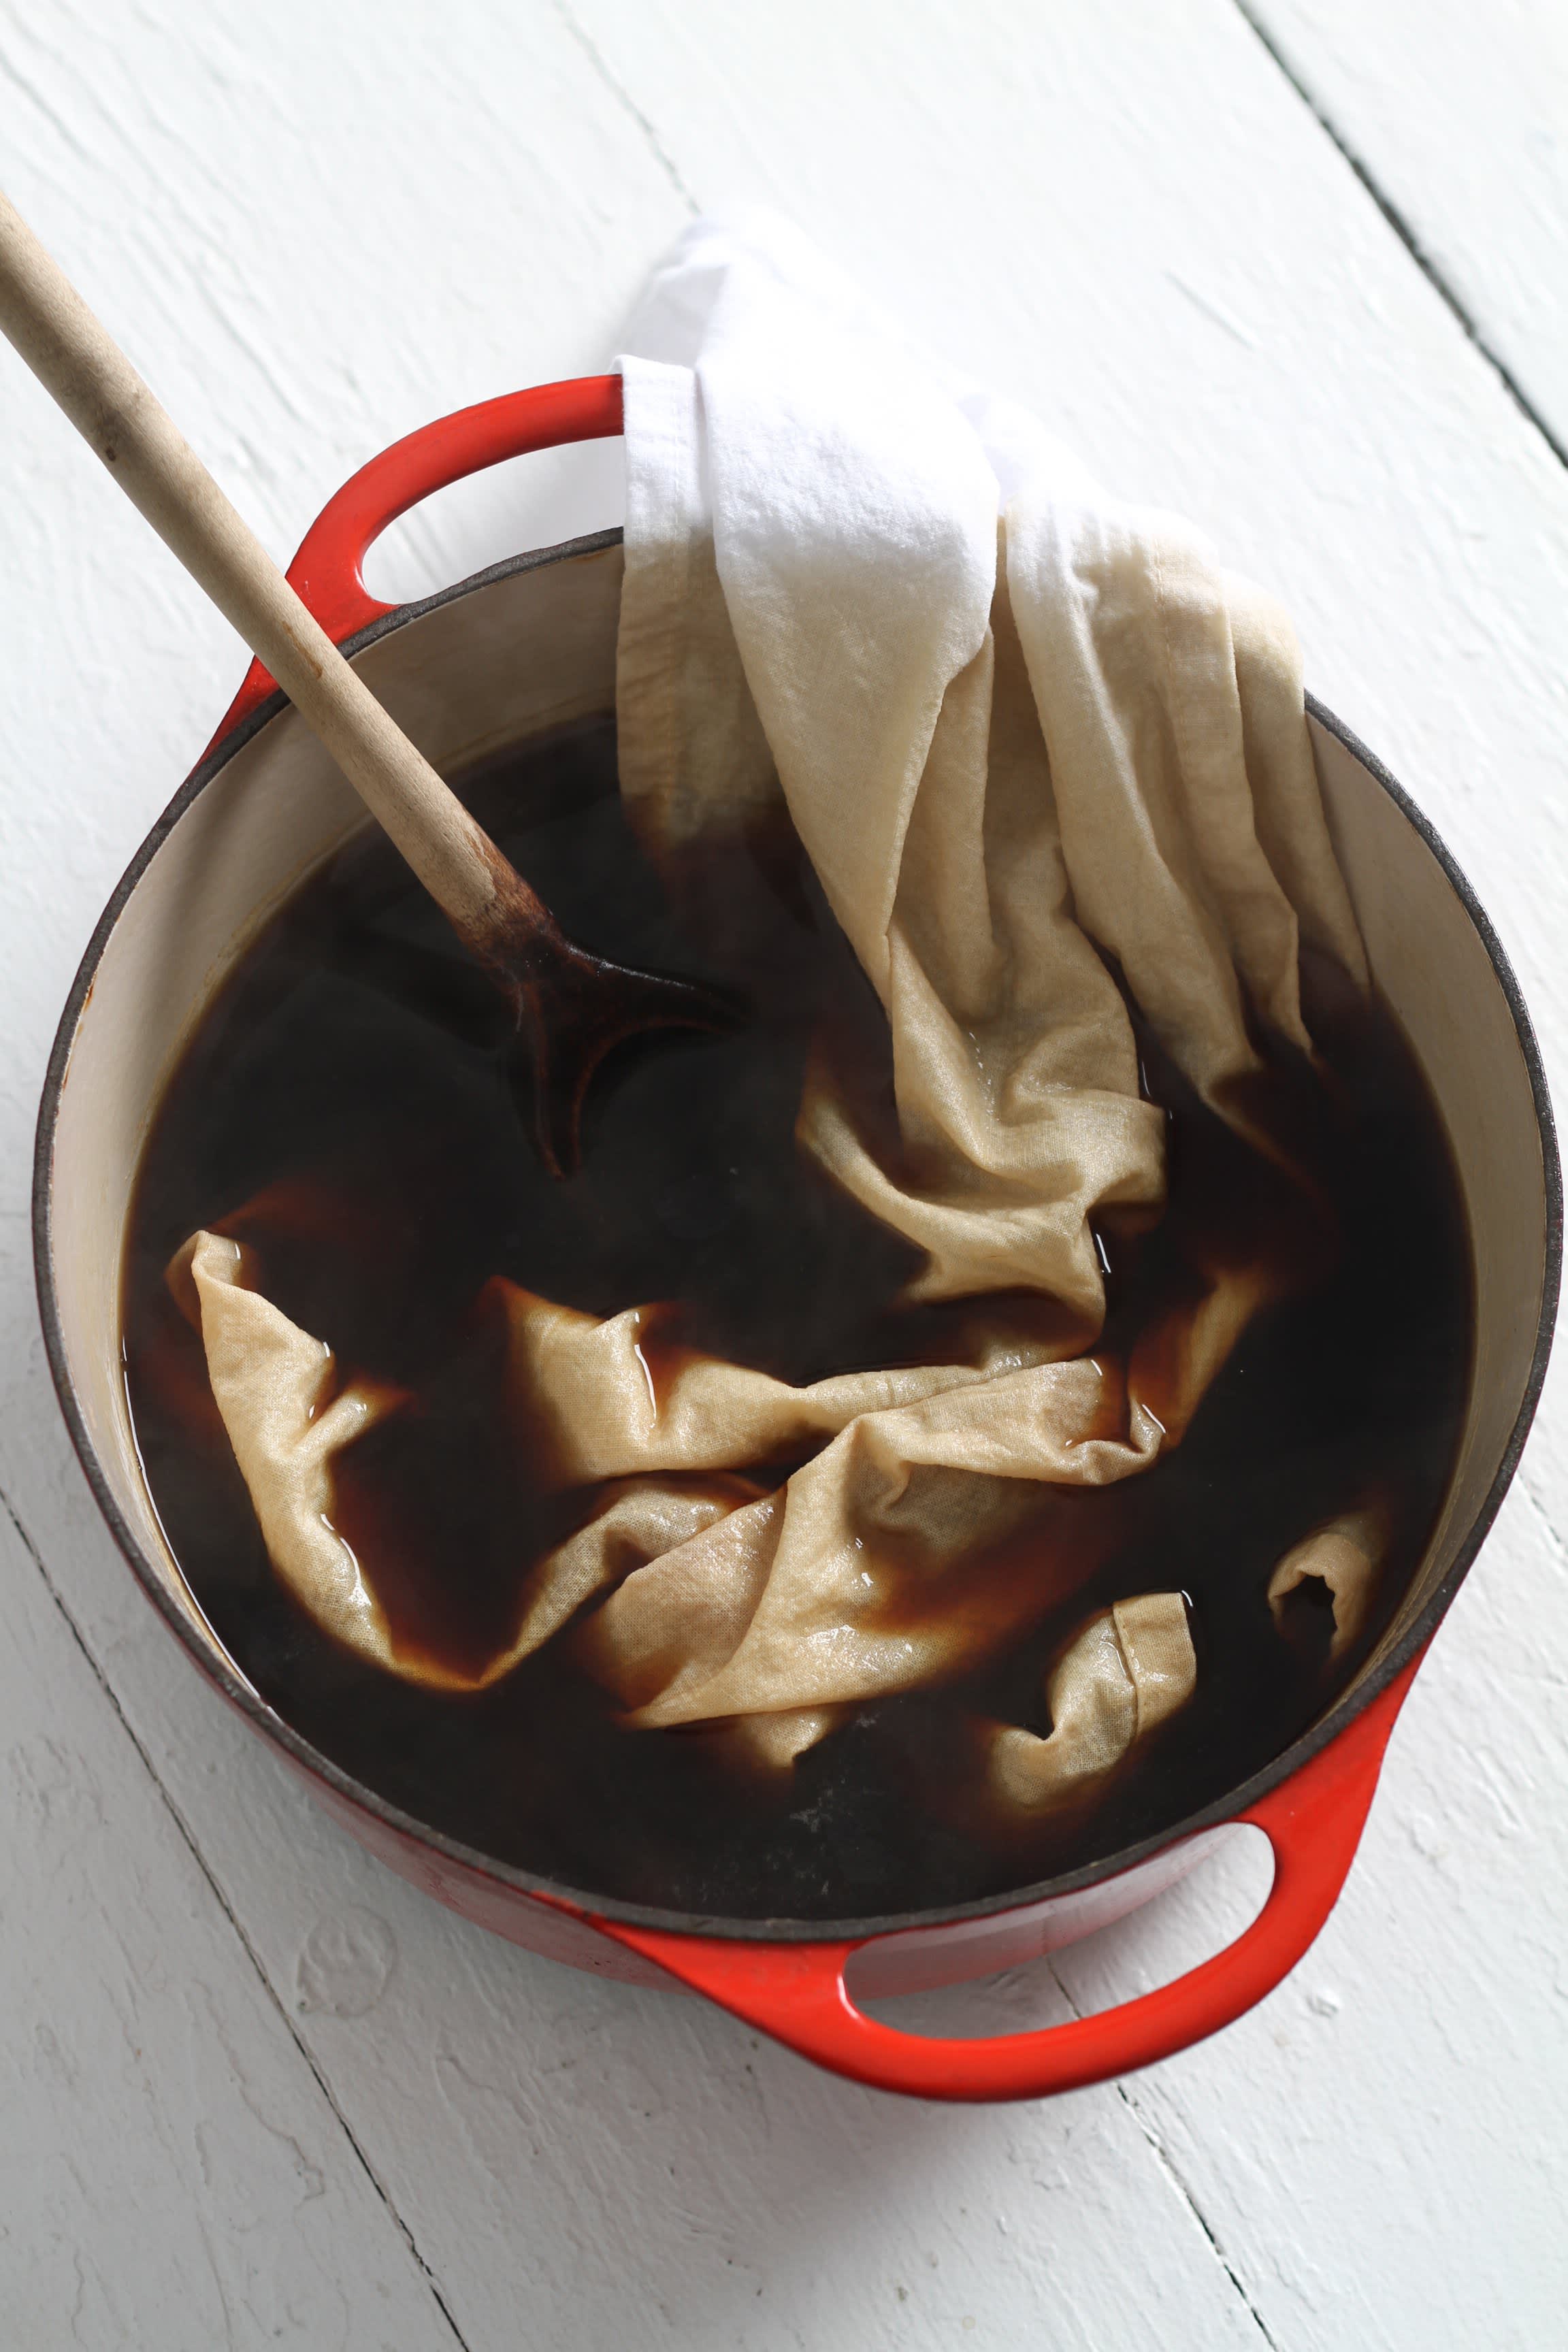 The Complete Guide to Dye your Clothes Black With Coffee